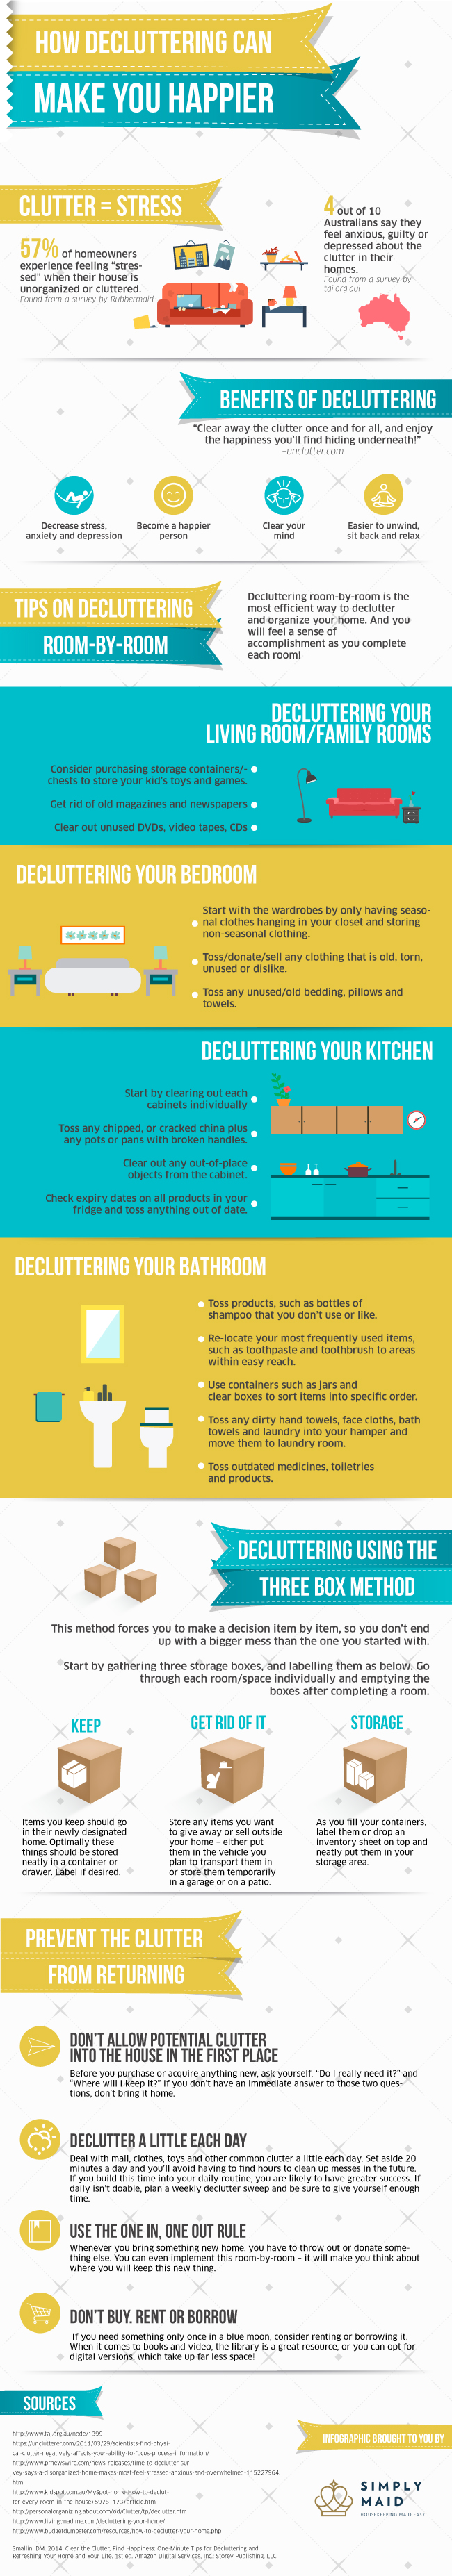 Declutter Your Home for Healthier Living